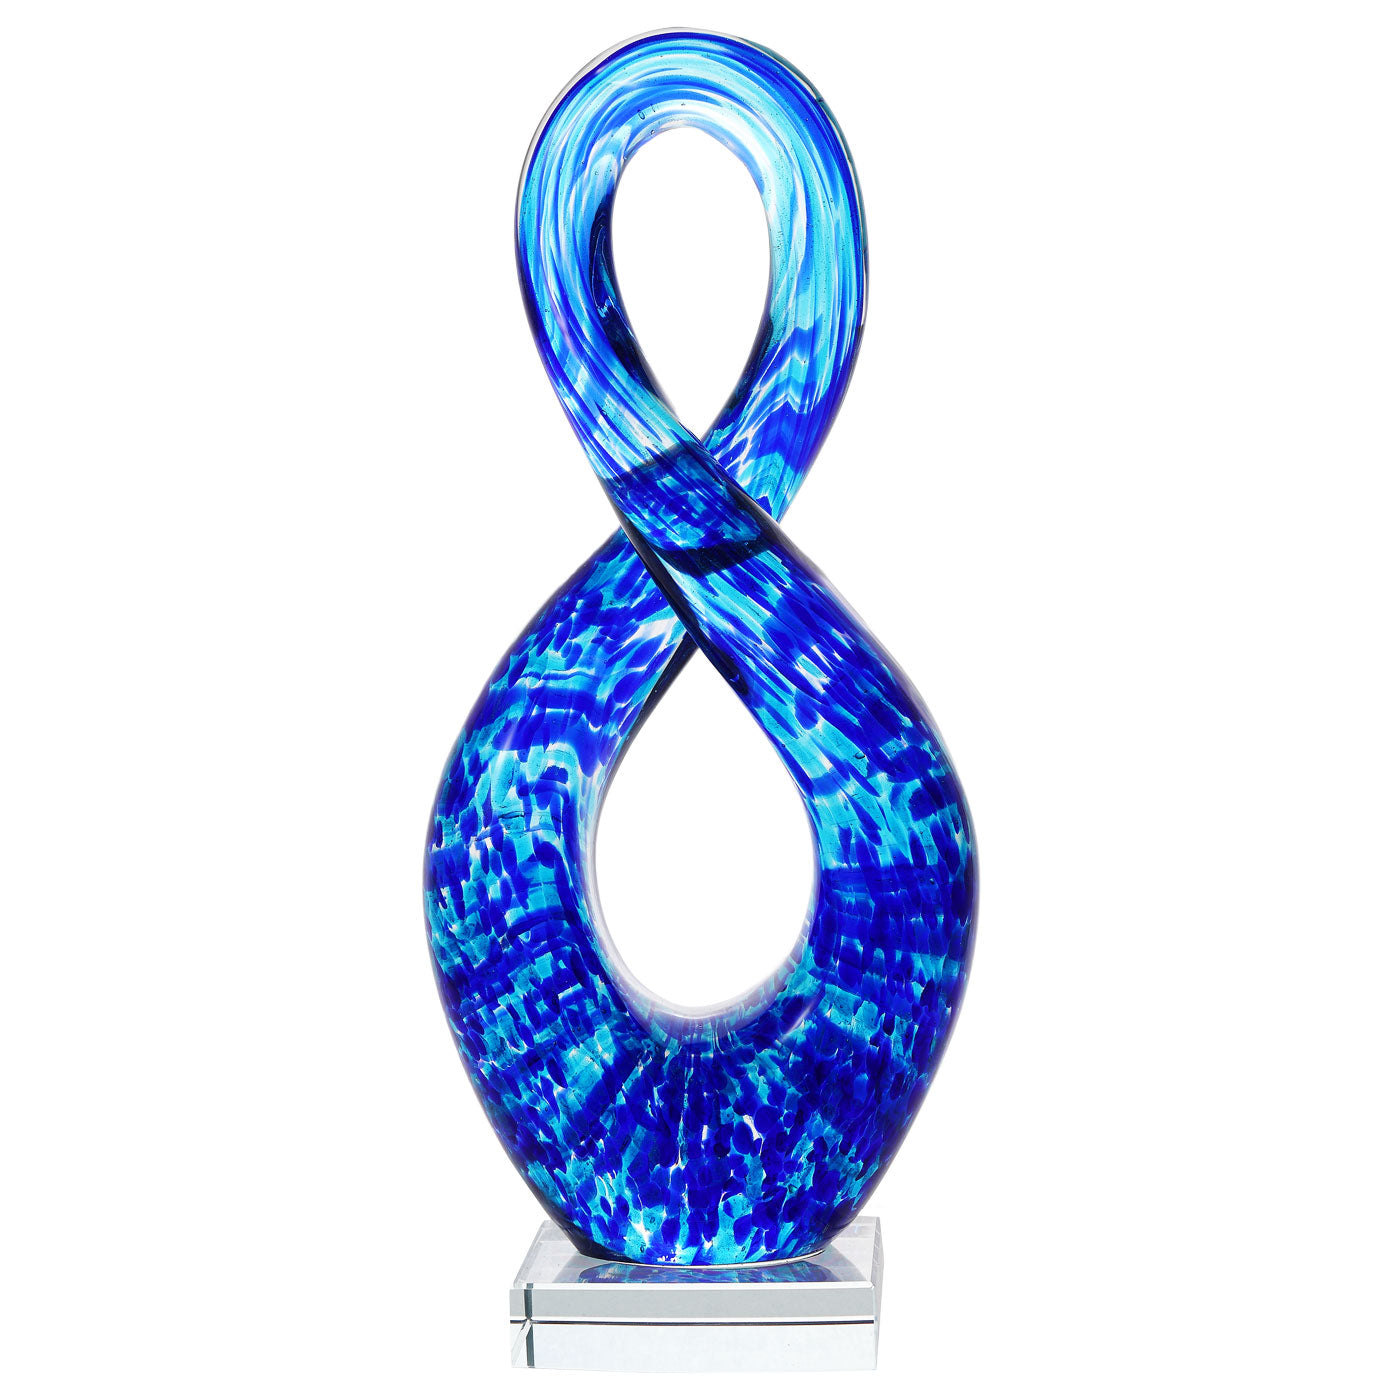 Luxury Lane Hand Blown Abstract Twisted Infinity Loop Sommerso Art Glass Sculpture 15 inch tall